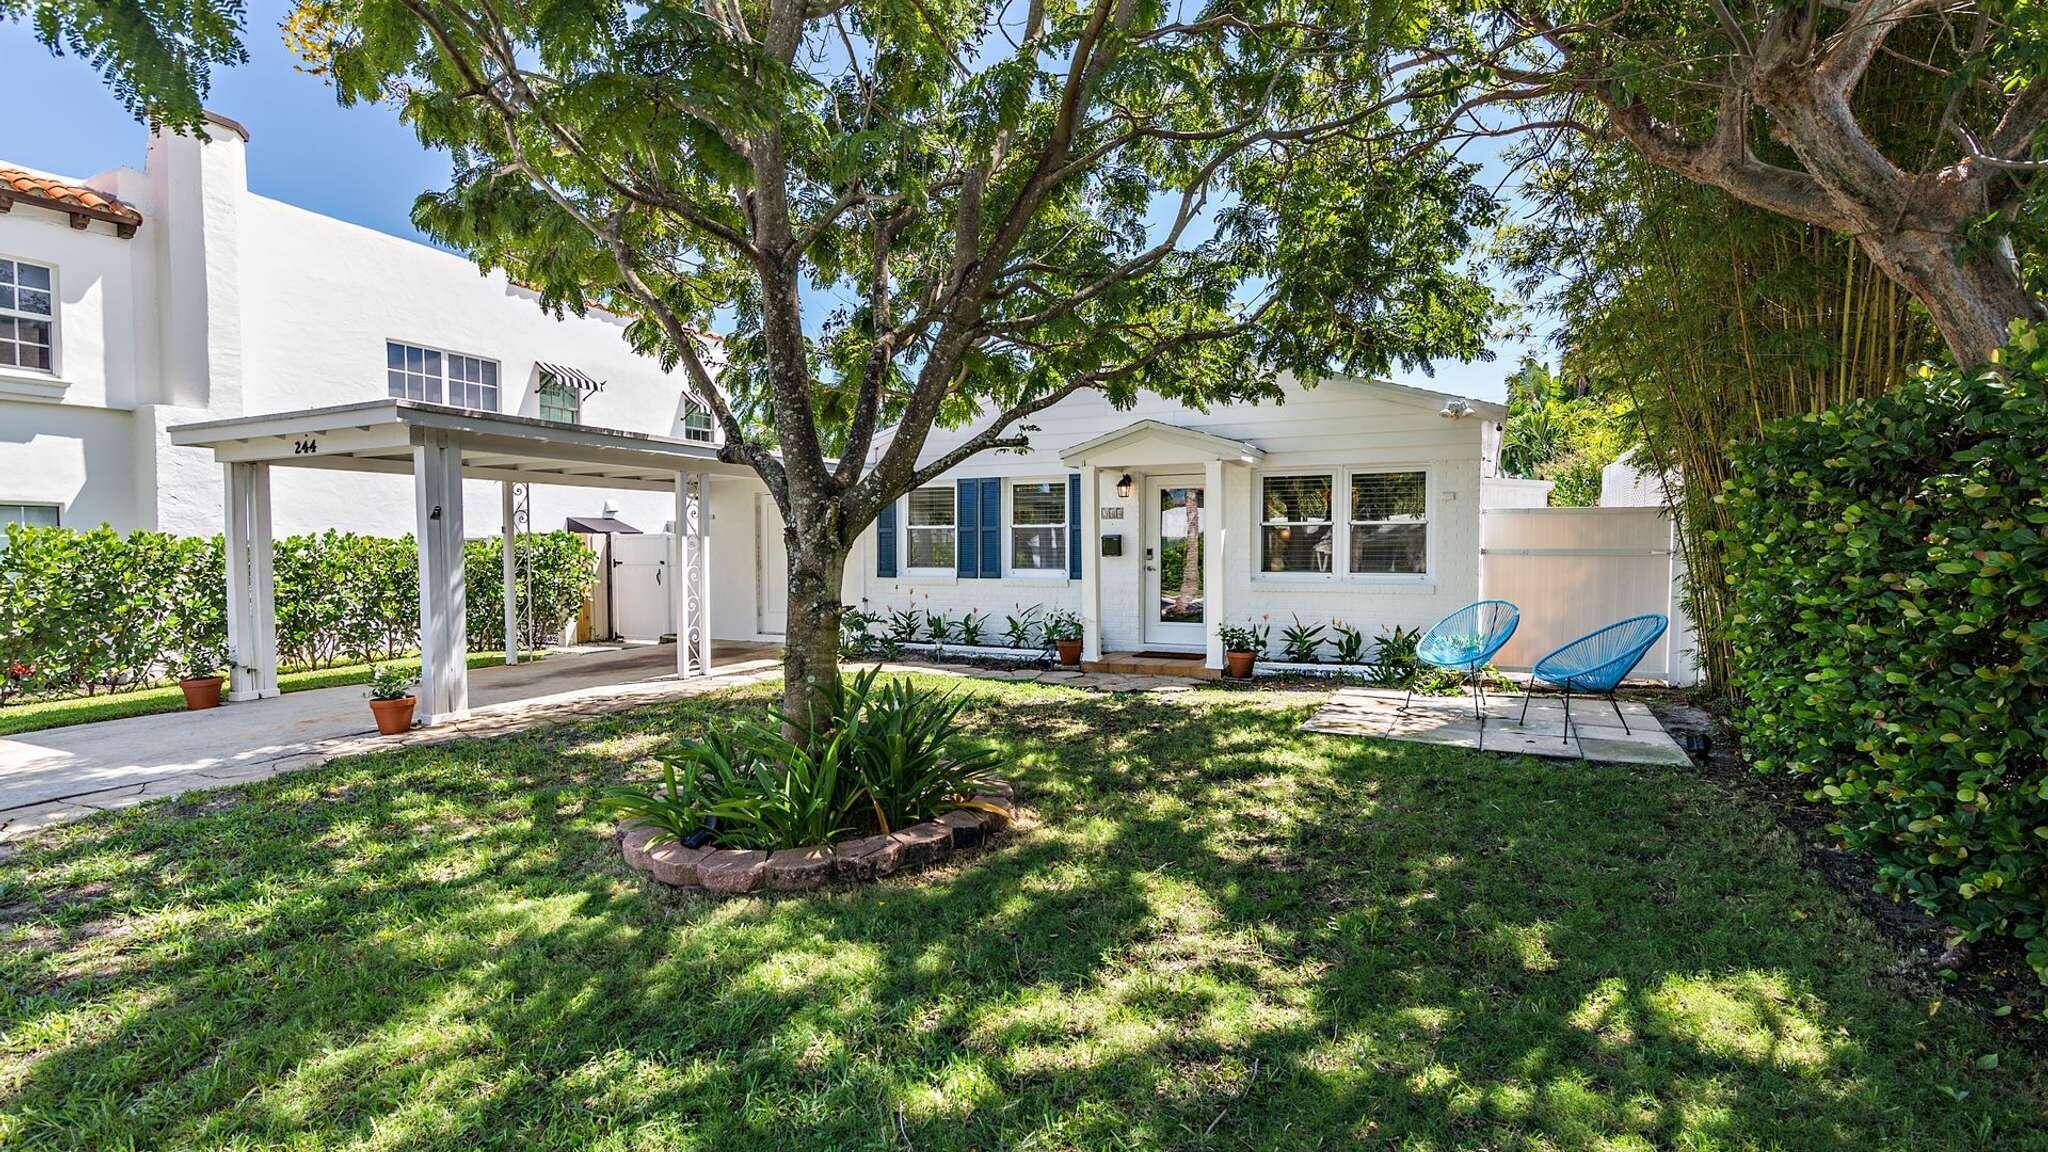 Brand new renovation and newly furnished, 3 bedroom, 2 bathroom home with private heated pool in SoSo neighborhood of West Palm Beach.